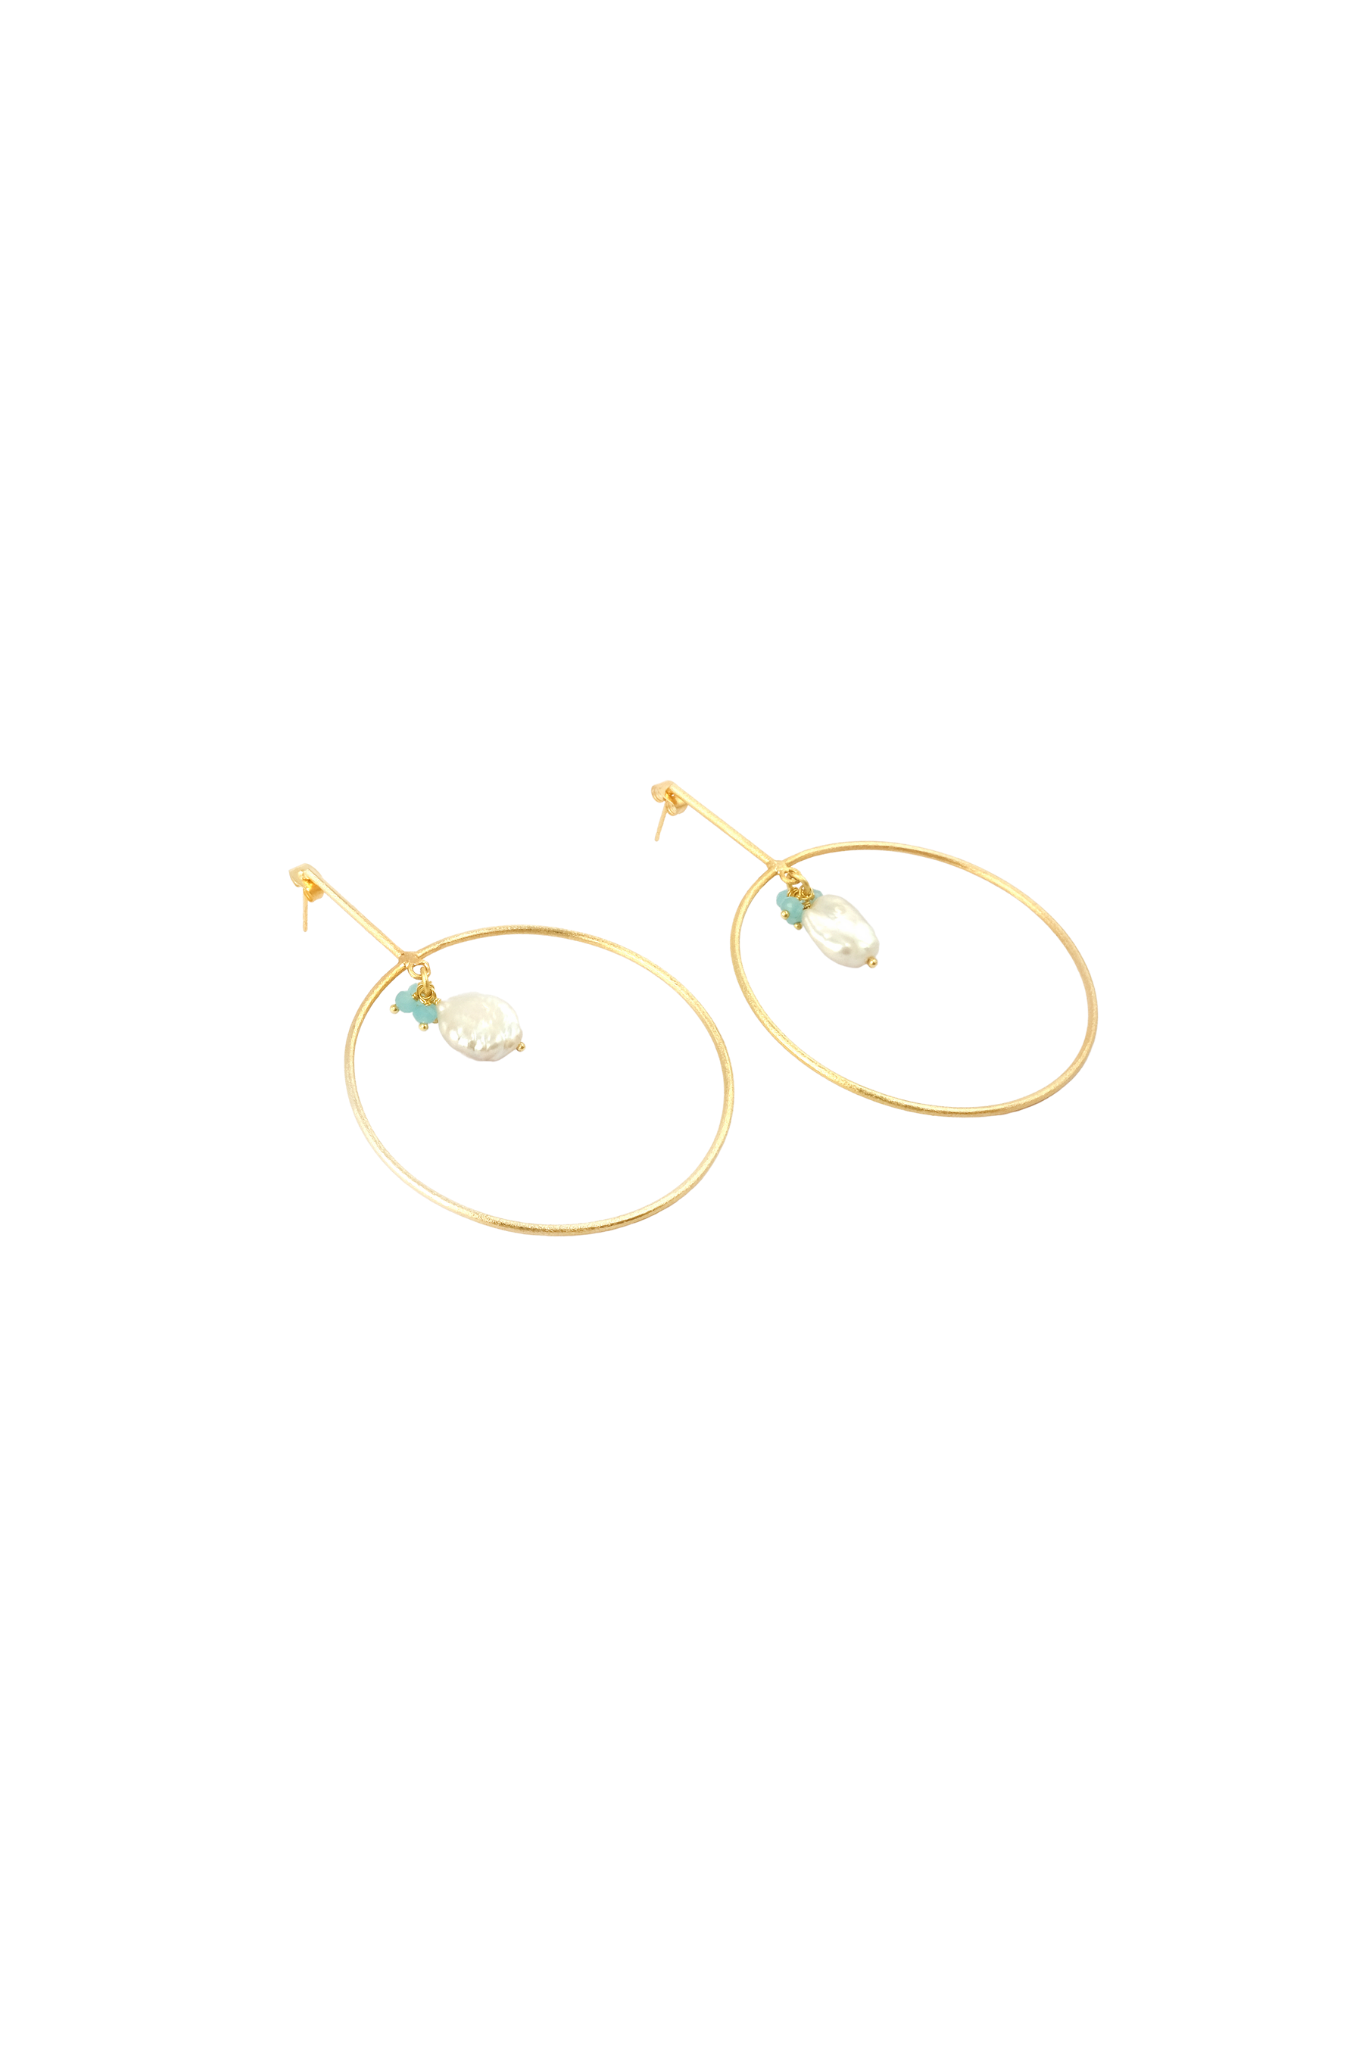 Gold Hoop Drop Earrings with Pearl and Chalcedony Accent